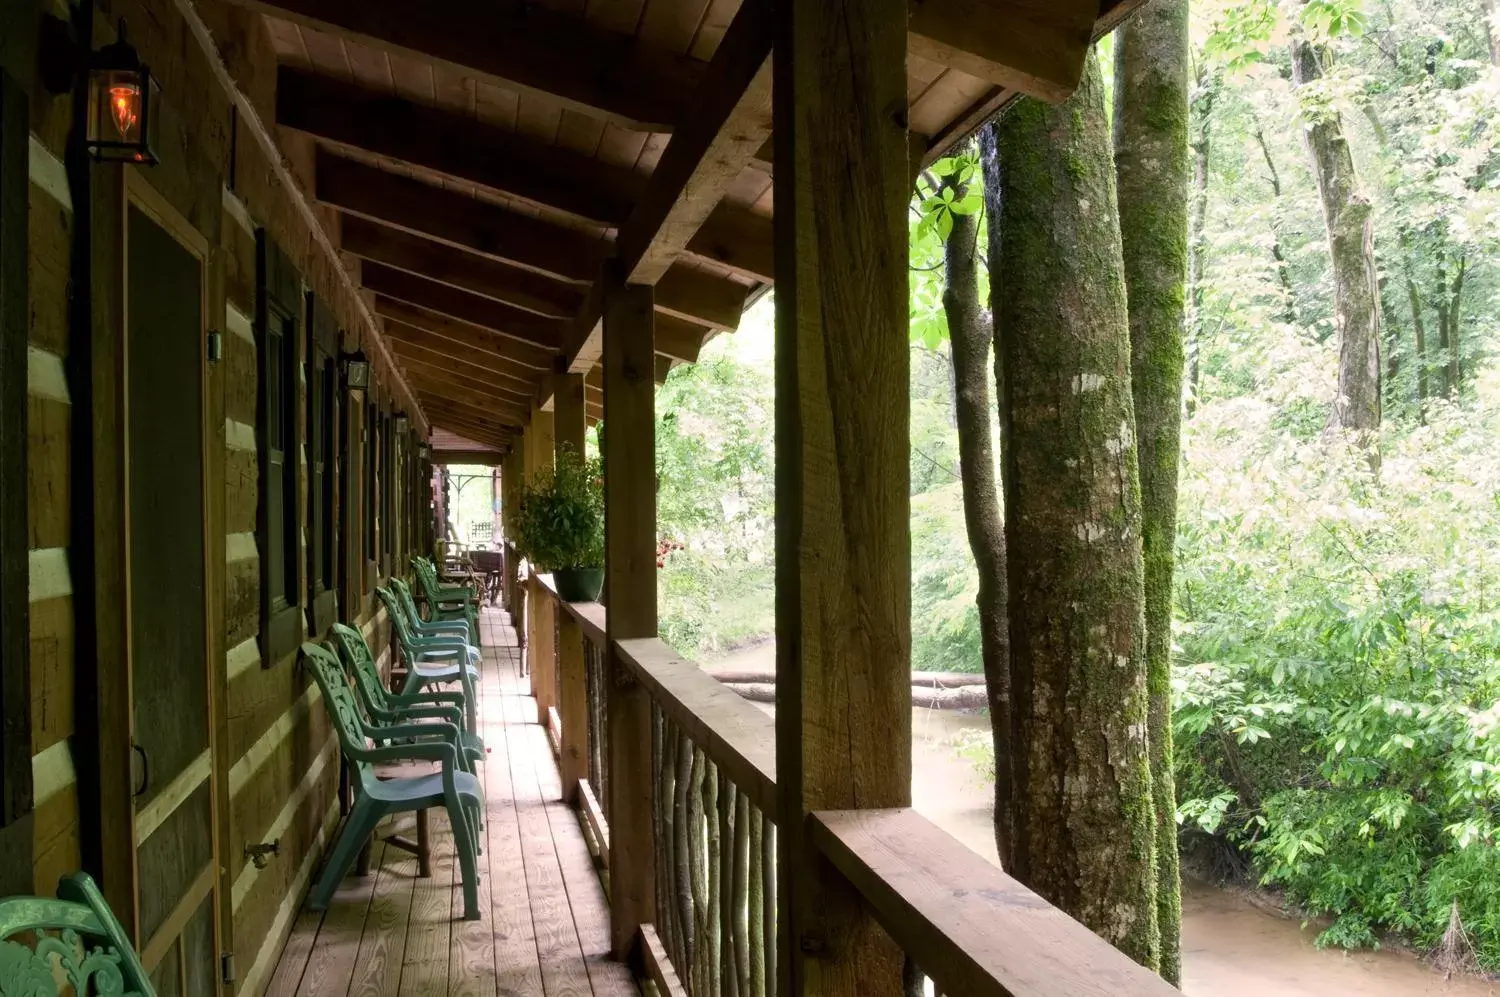 Balcony/Terrace in Creekwalk Inn Bed and Breakfast with Cabins